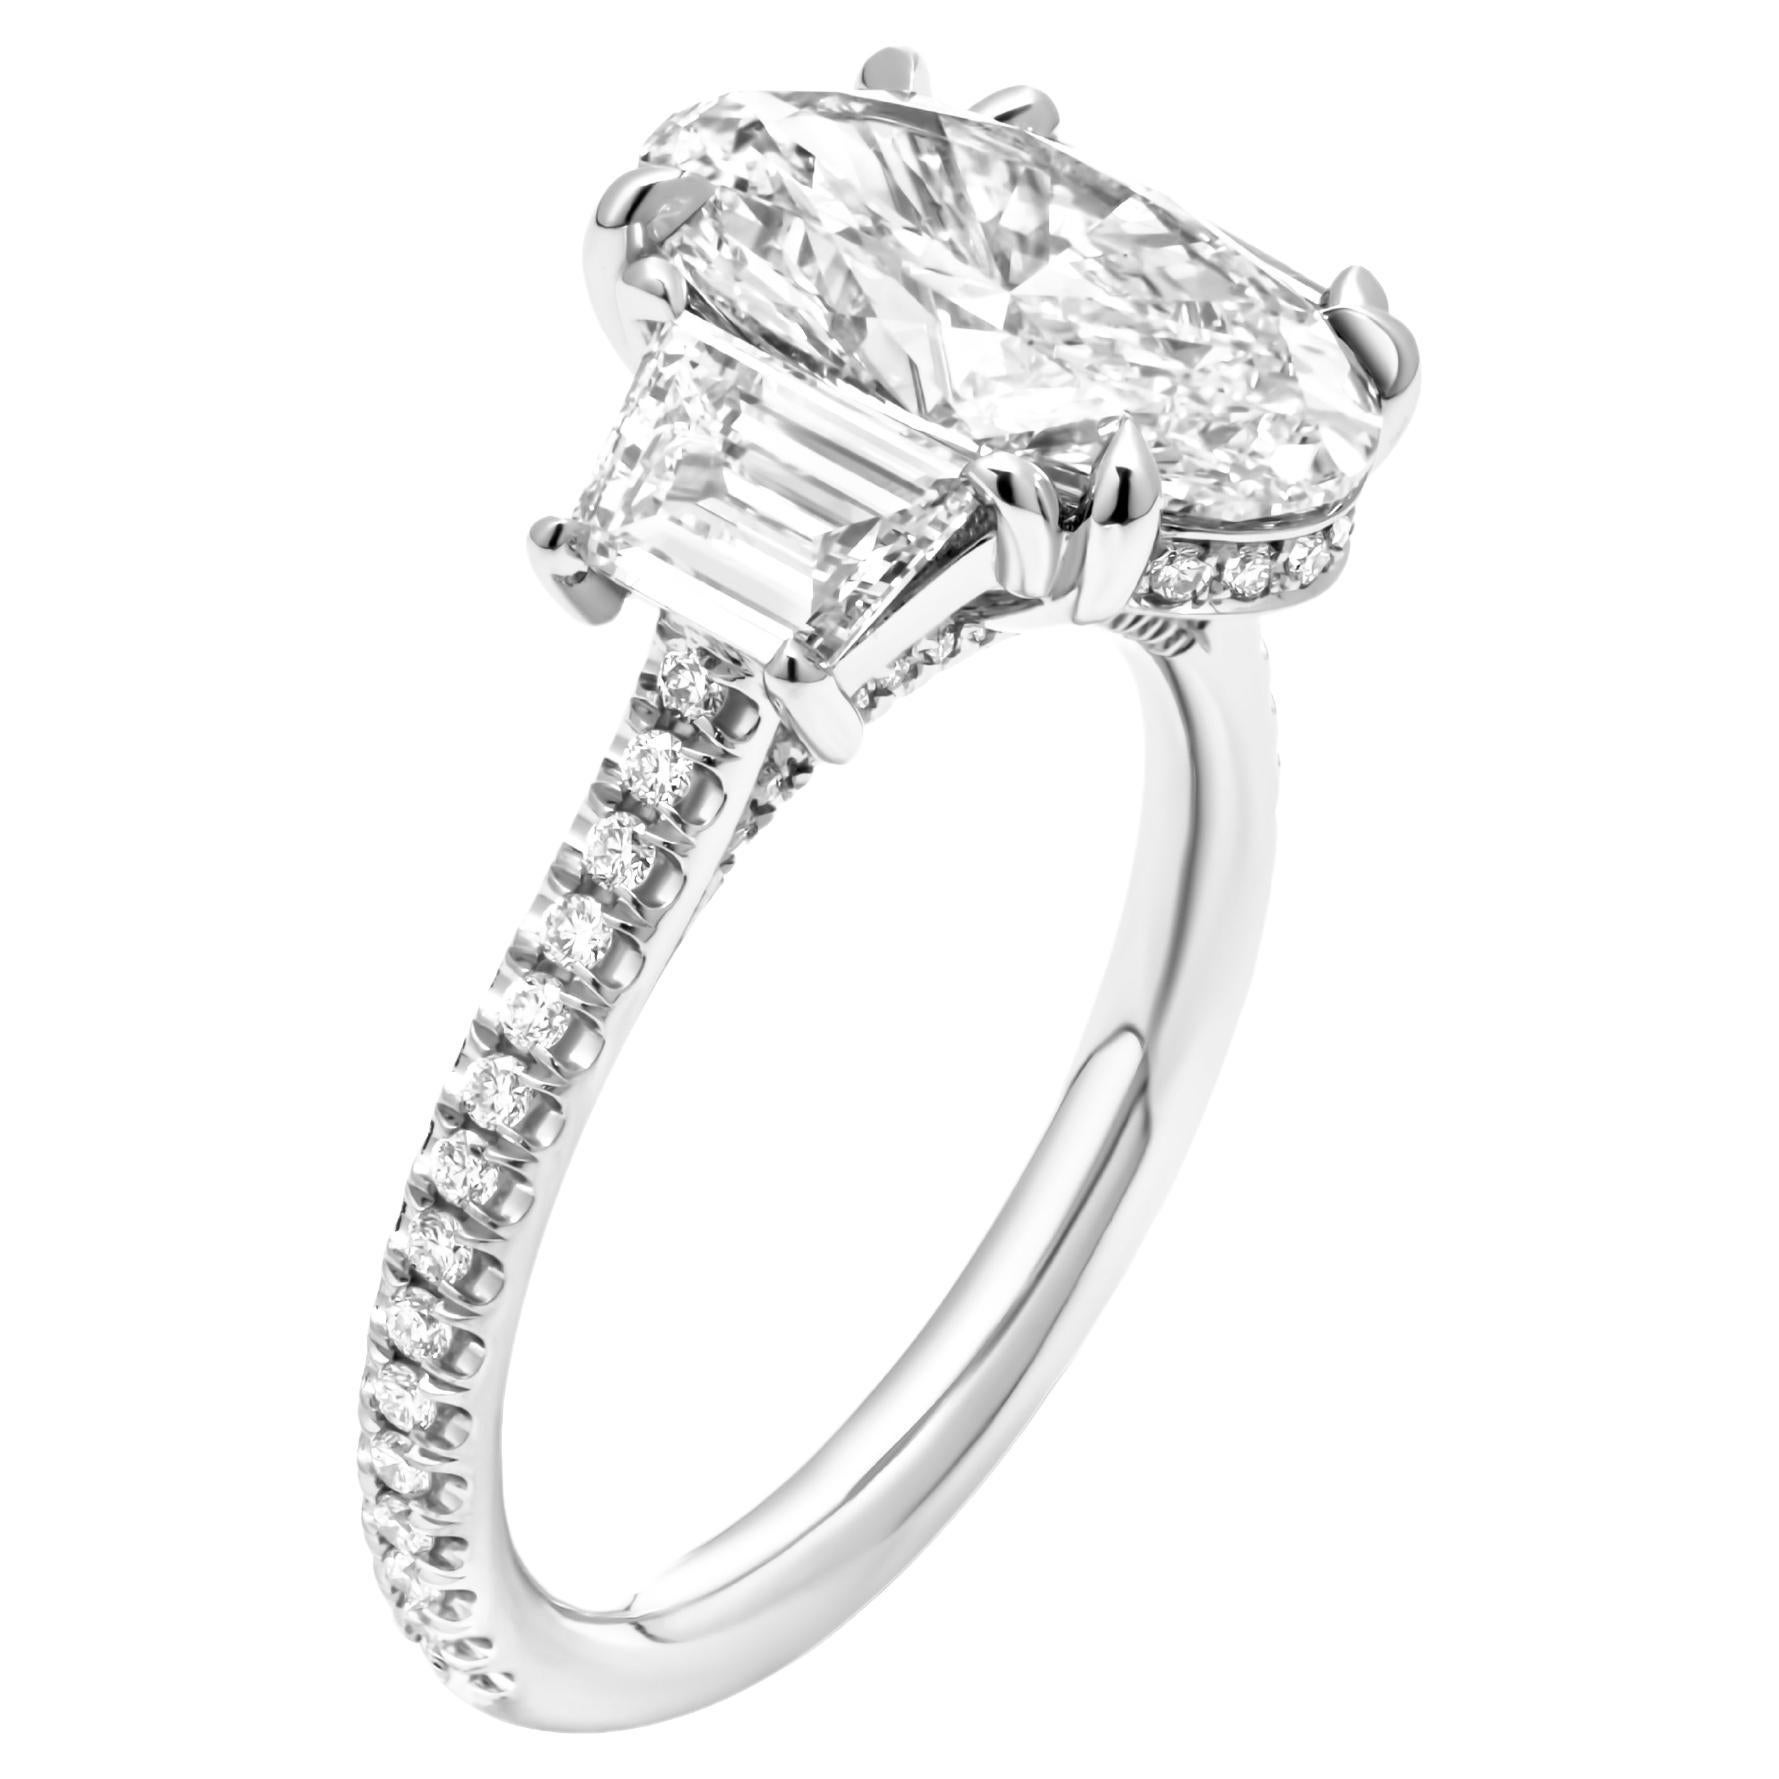 GIA Certified 3 stone ring with 3.01ct I VVS2 Oval Diamond